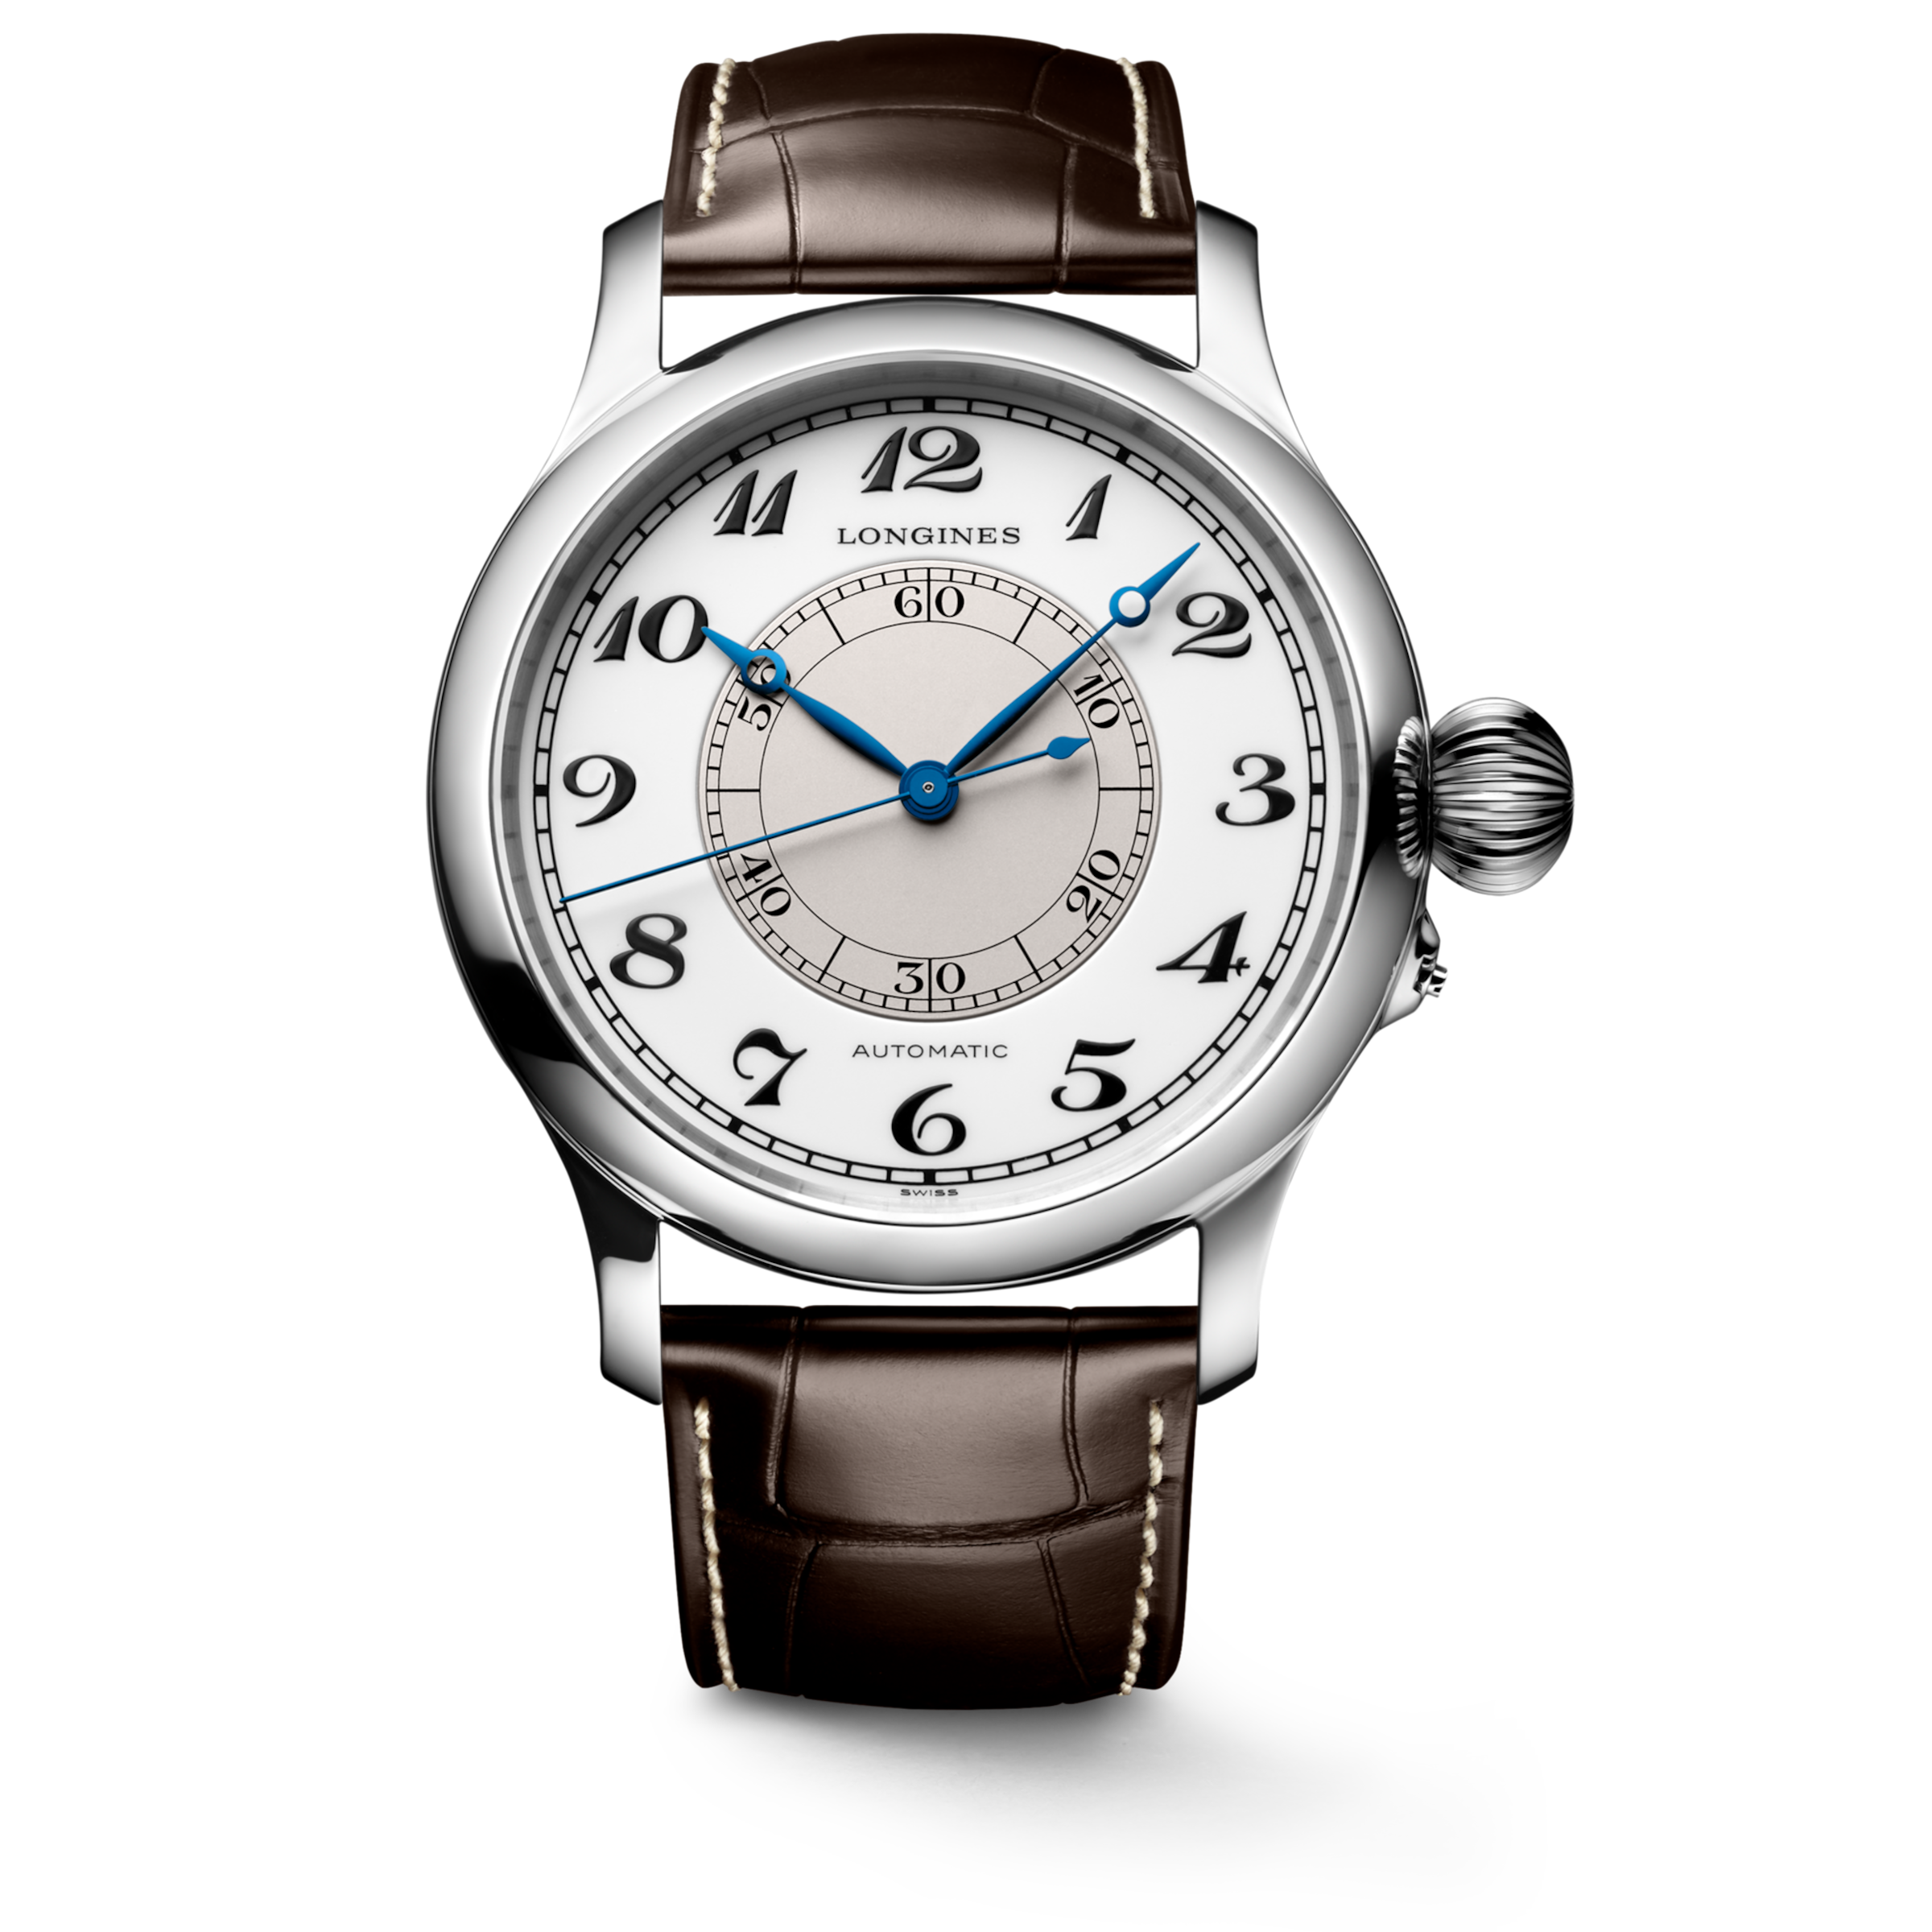 Longines WEEMS SECOND-SETTING WATCH Automatic Stainless steel Watch - L2.713.4.13.0